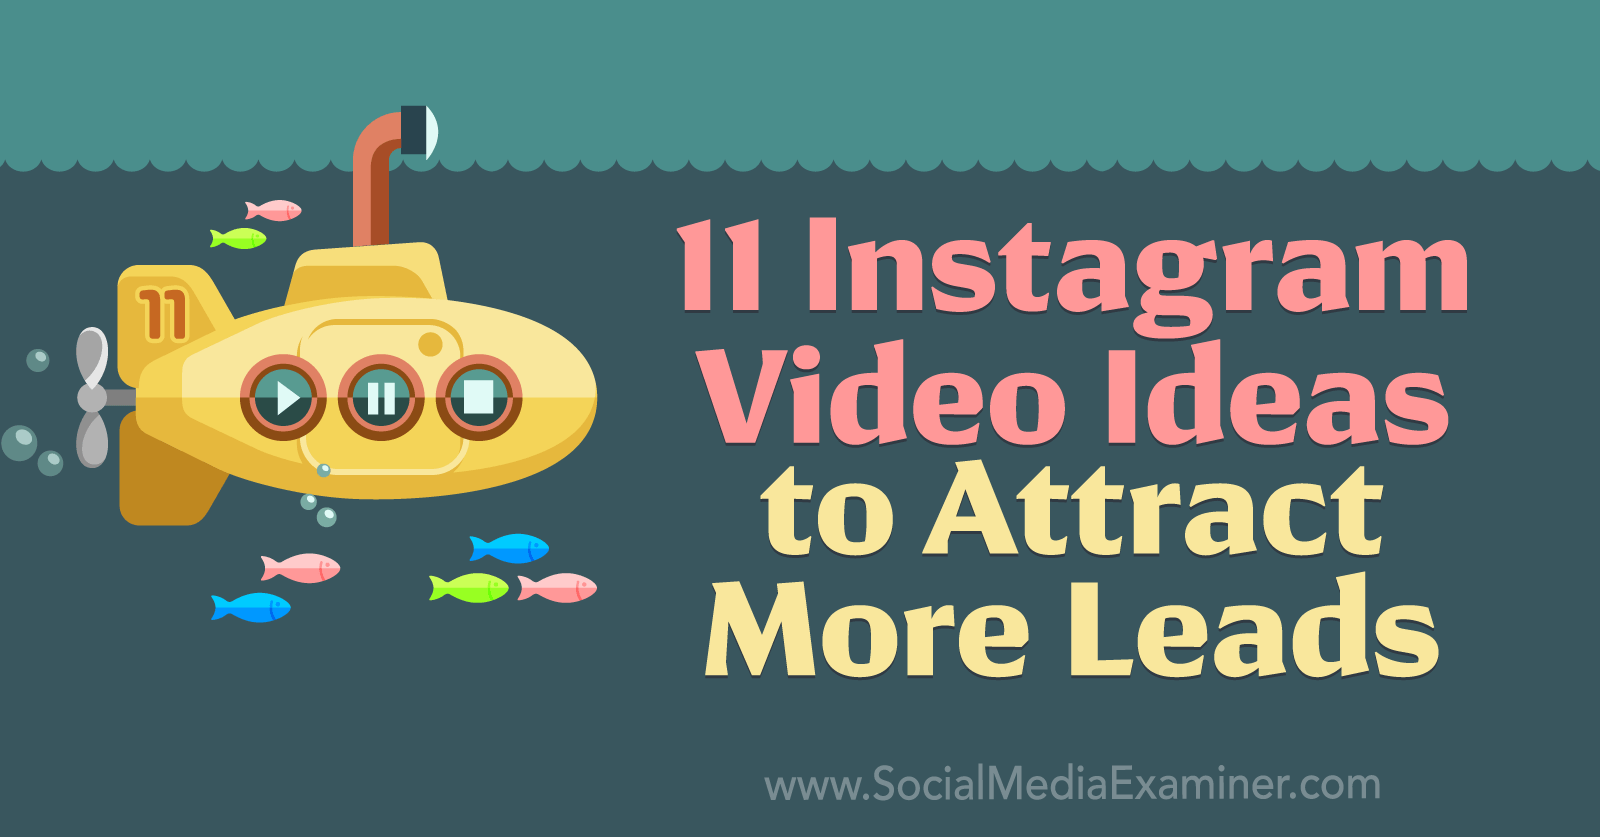 11 Instagram Video Ideas to Attract More Leads by Anna Sonnenberg on Social Media Examiner.